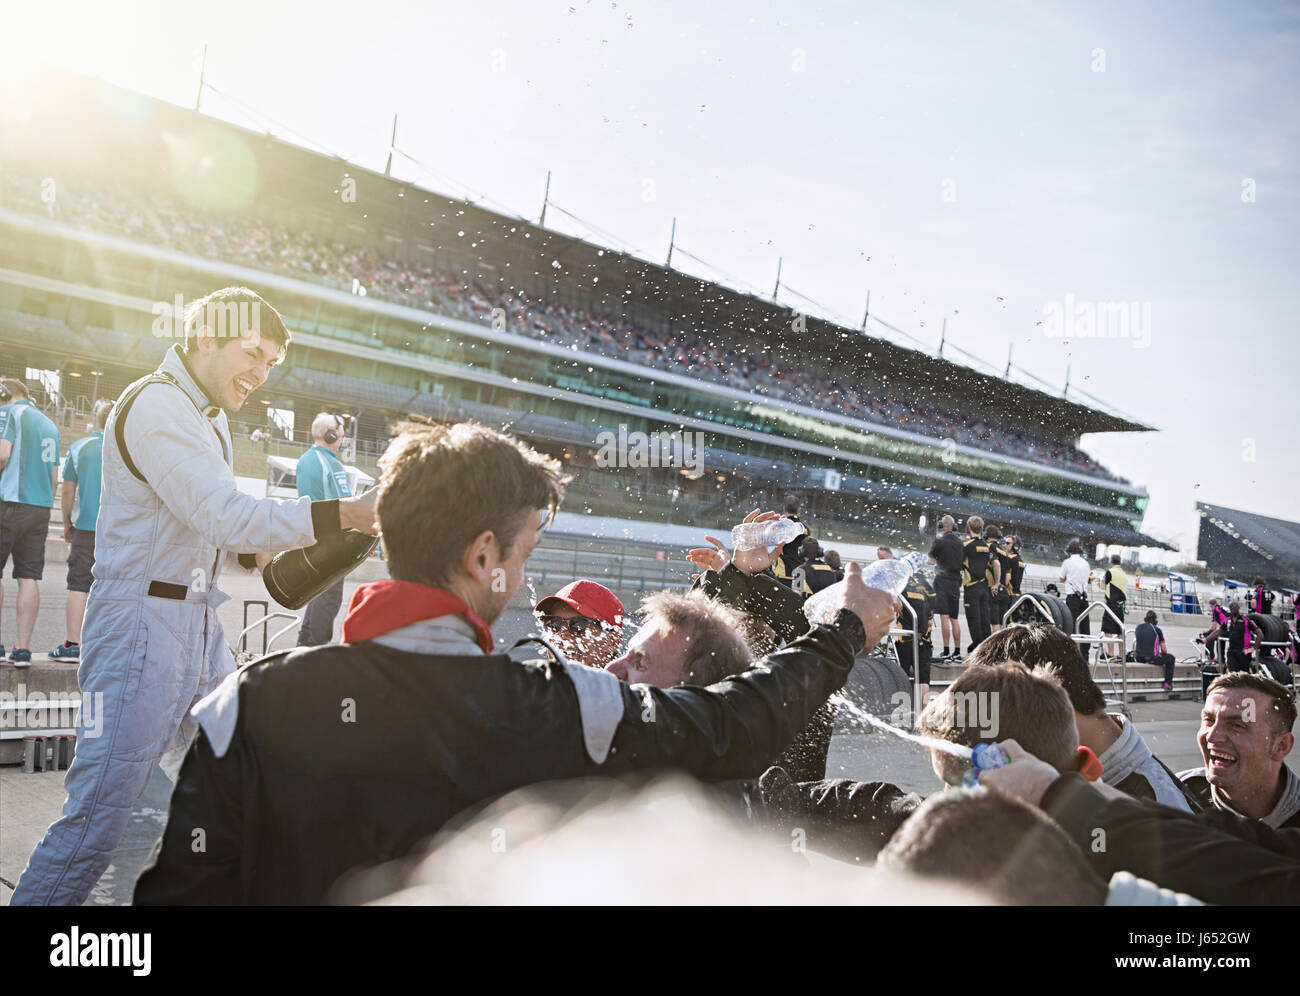 Formula one racing team and driver spraying champagne, celebrating victory on sports track Stock Photo